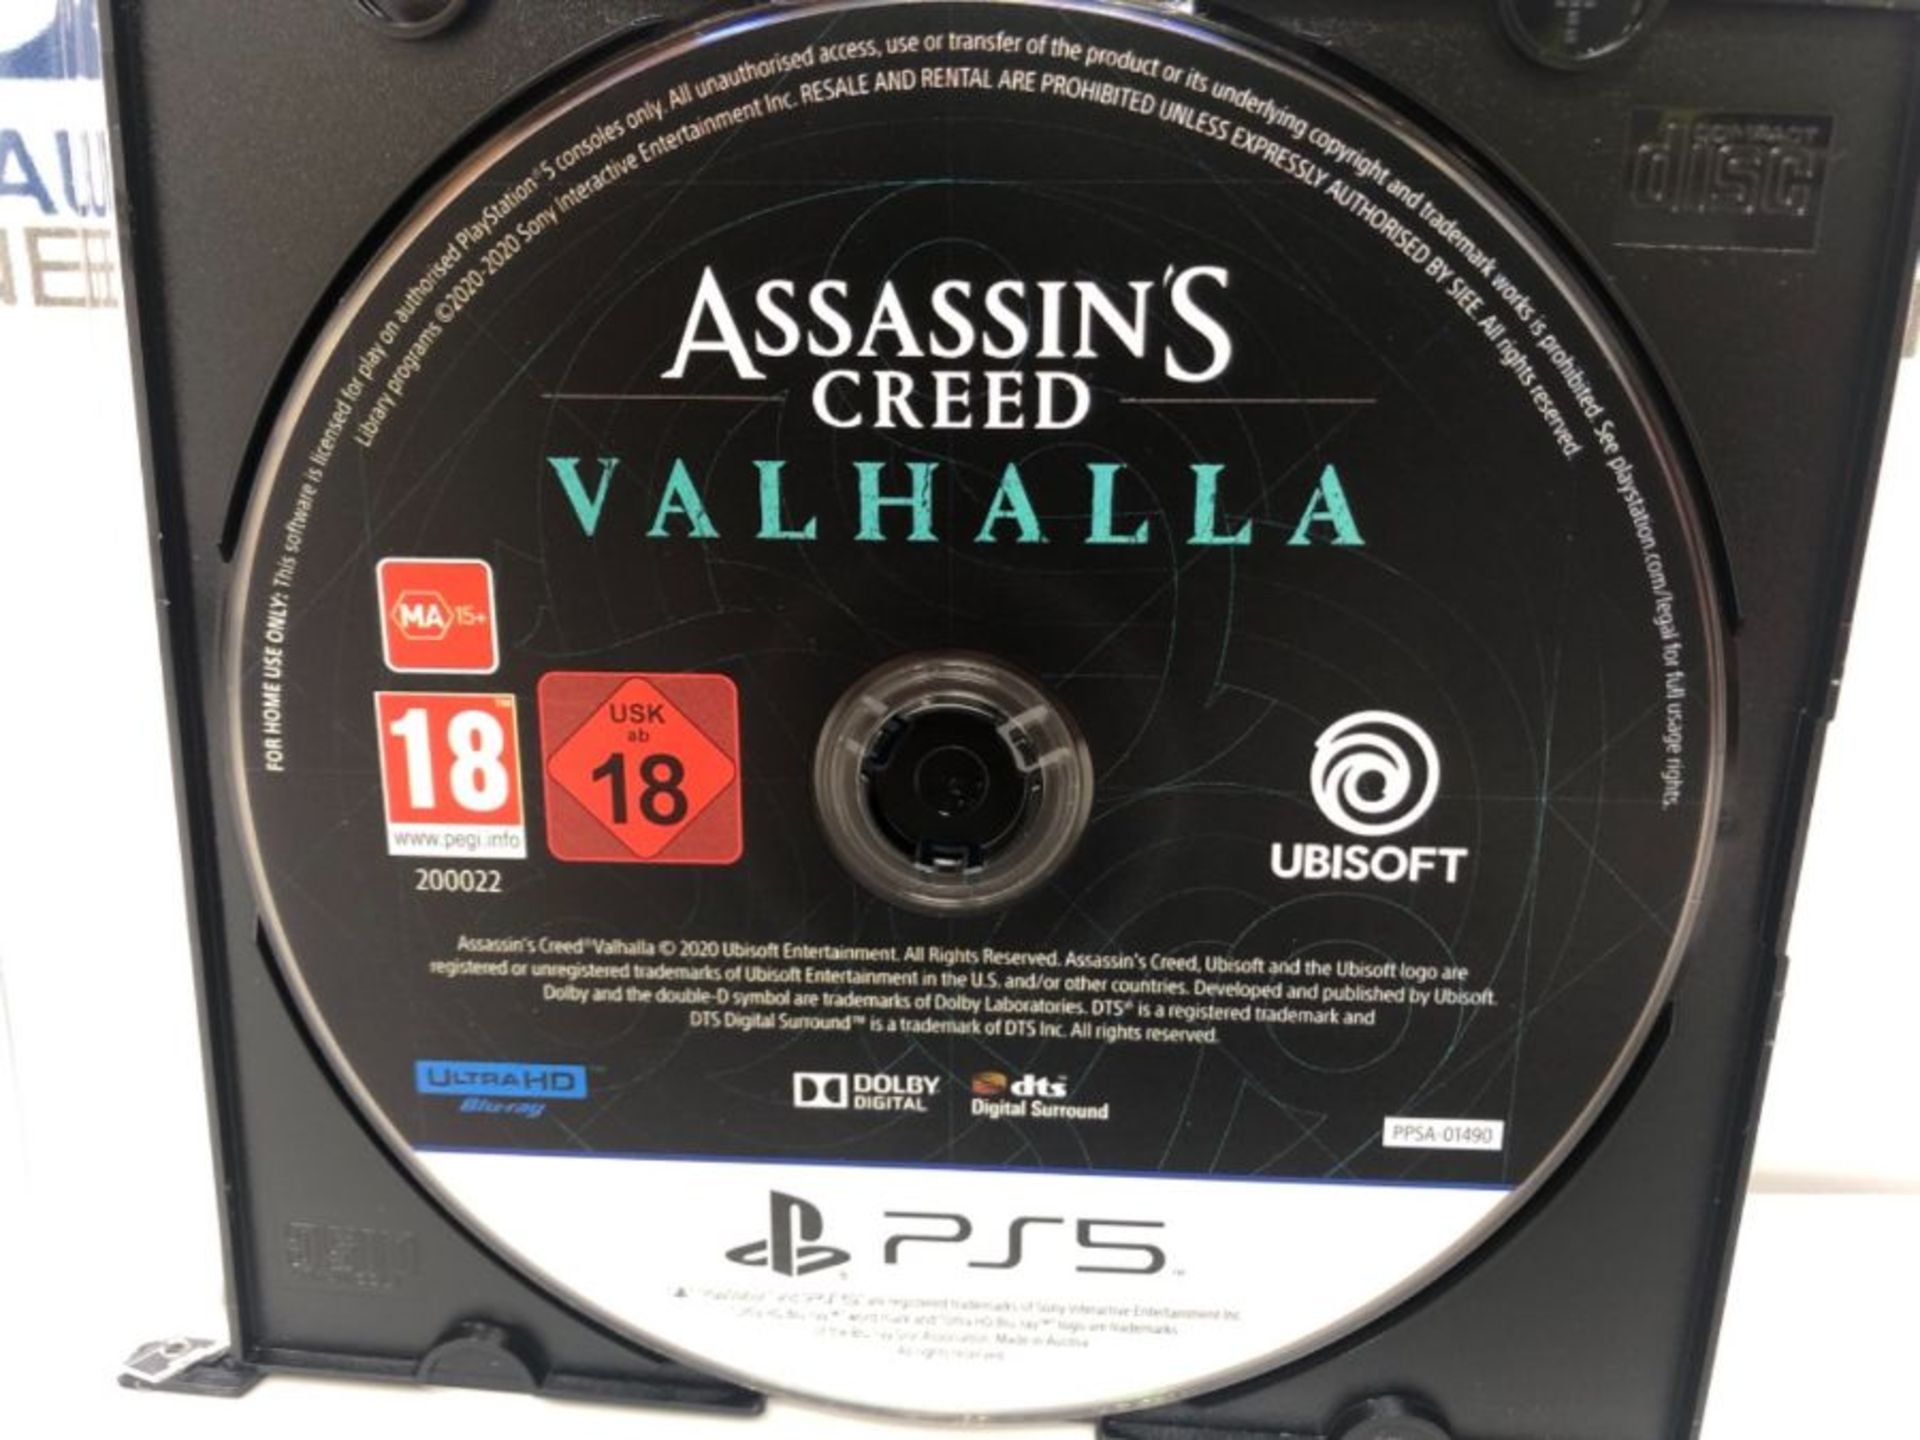 Assassin's Creed Valhalla - Image 3 of 3